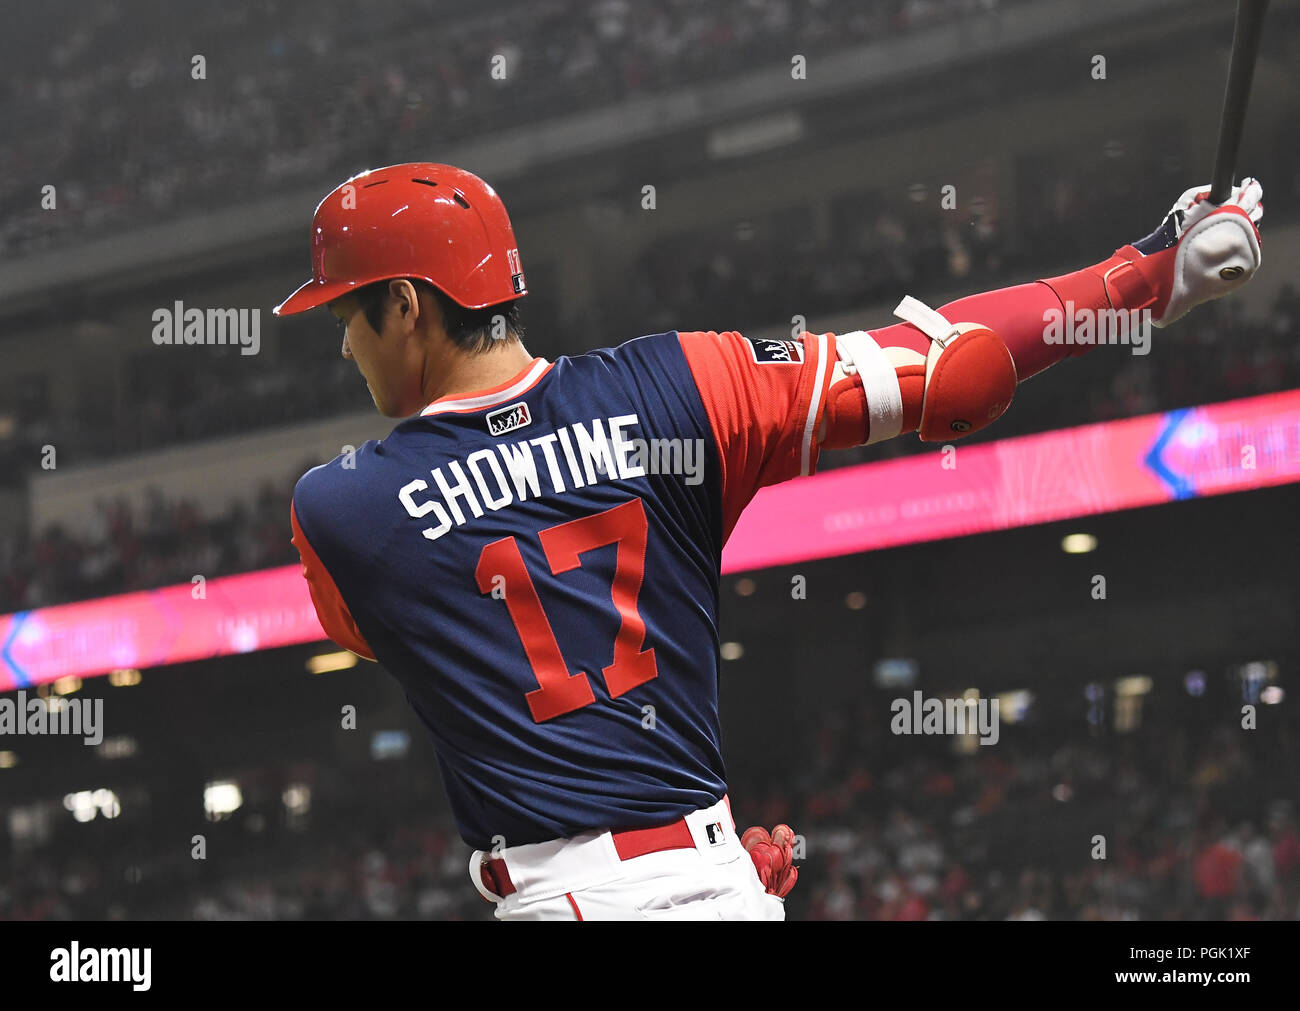 Los Angeles Angels designated hitter Shohei Ohtani wears a jersey with his  nickname SHOWTIME on the back as he hits a two-run home run off Houston  Astros starting pitcher Justin Verlander in